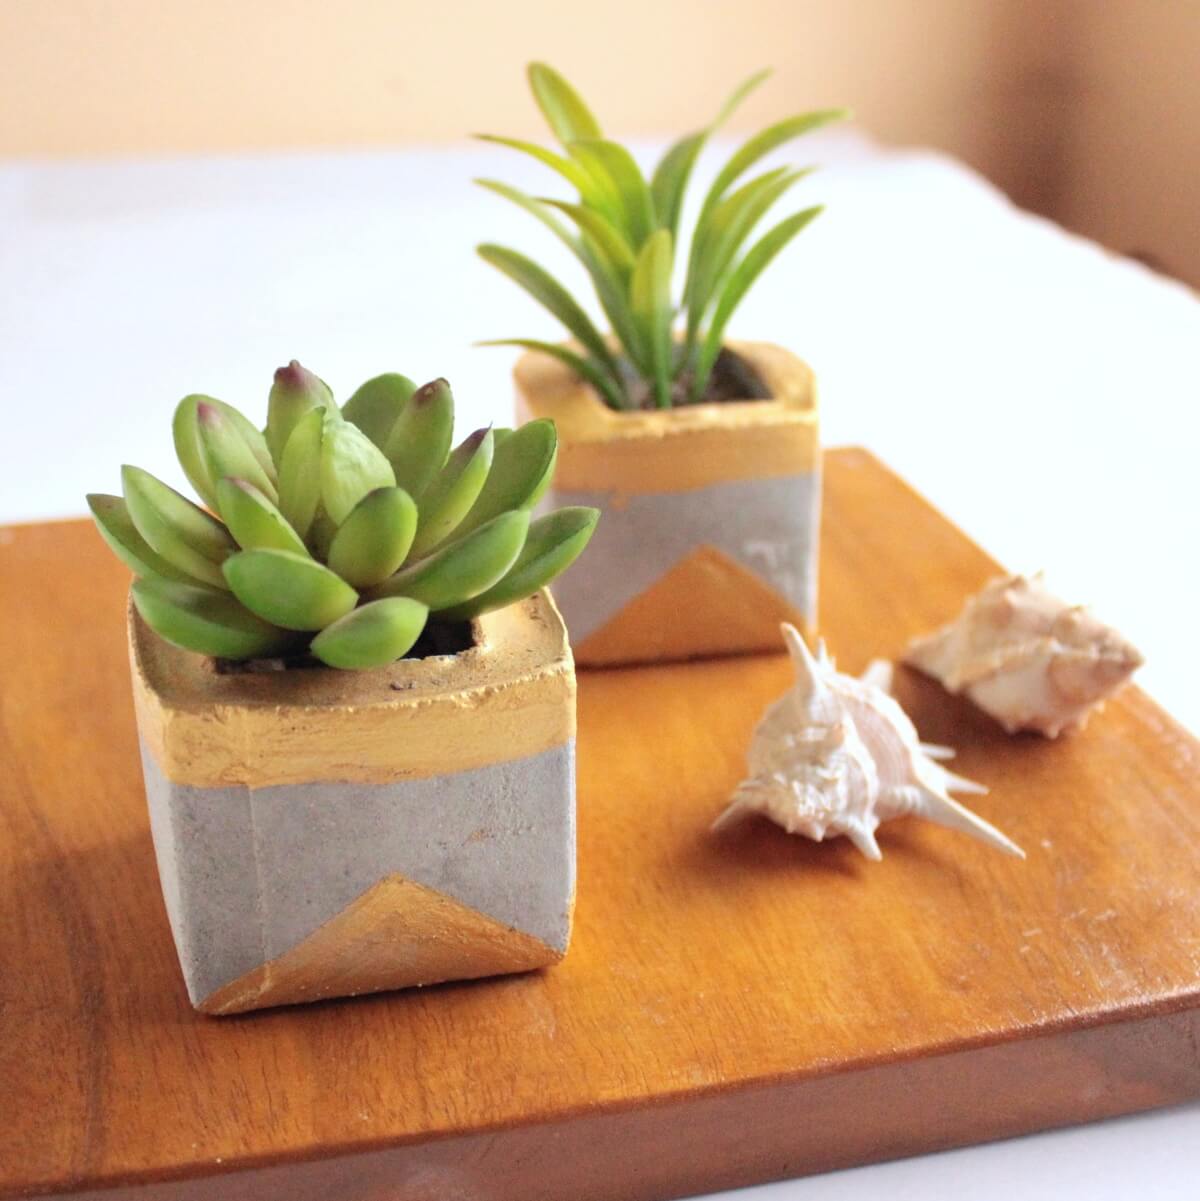 How to make cement planters for succulents and other small houseplants